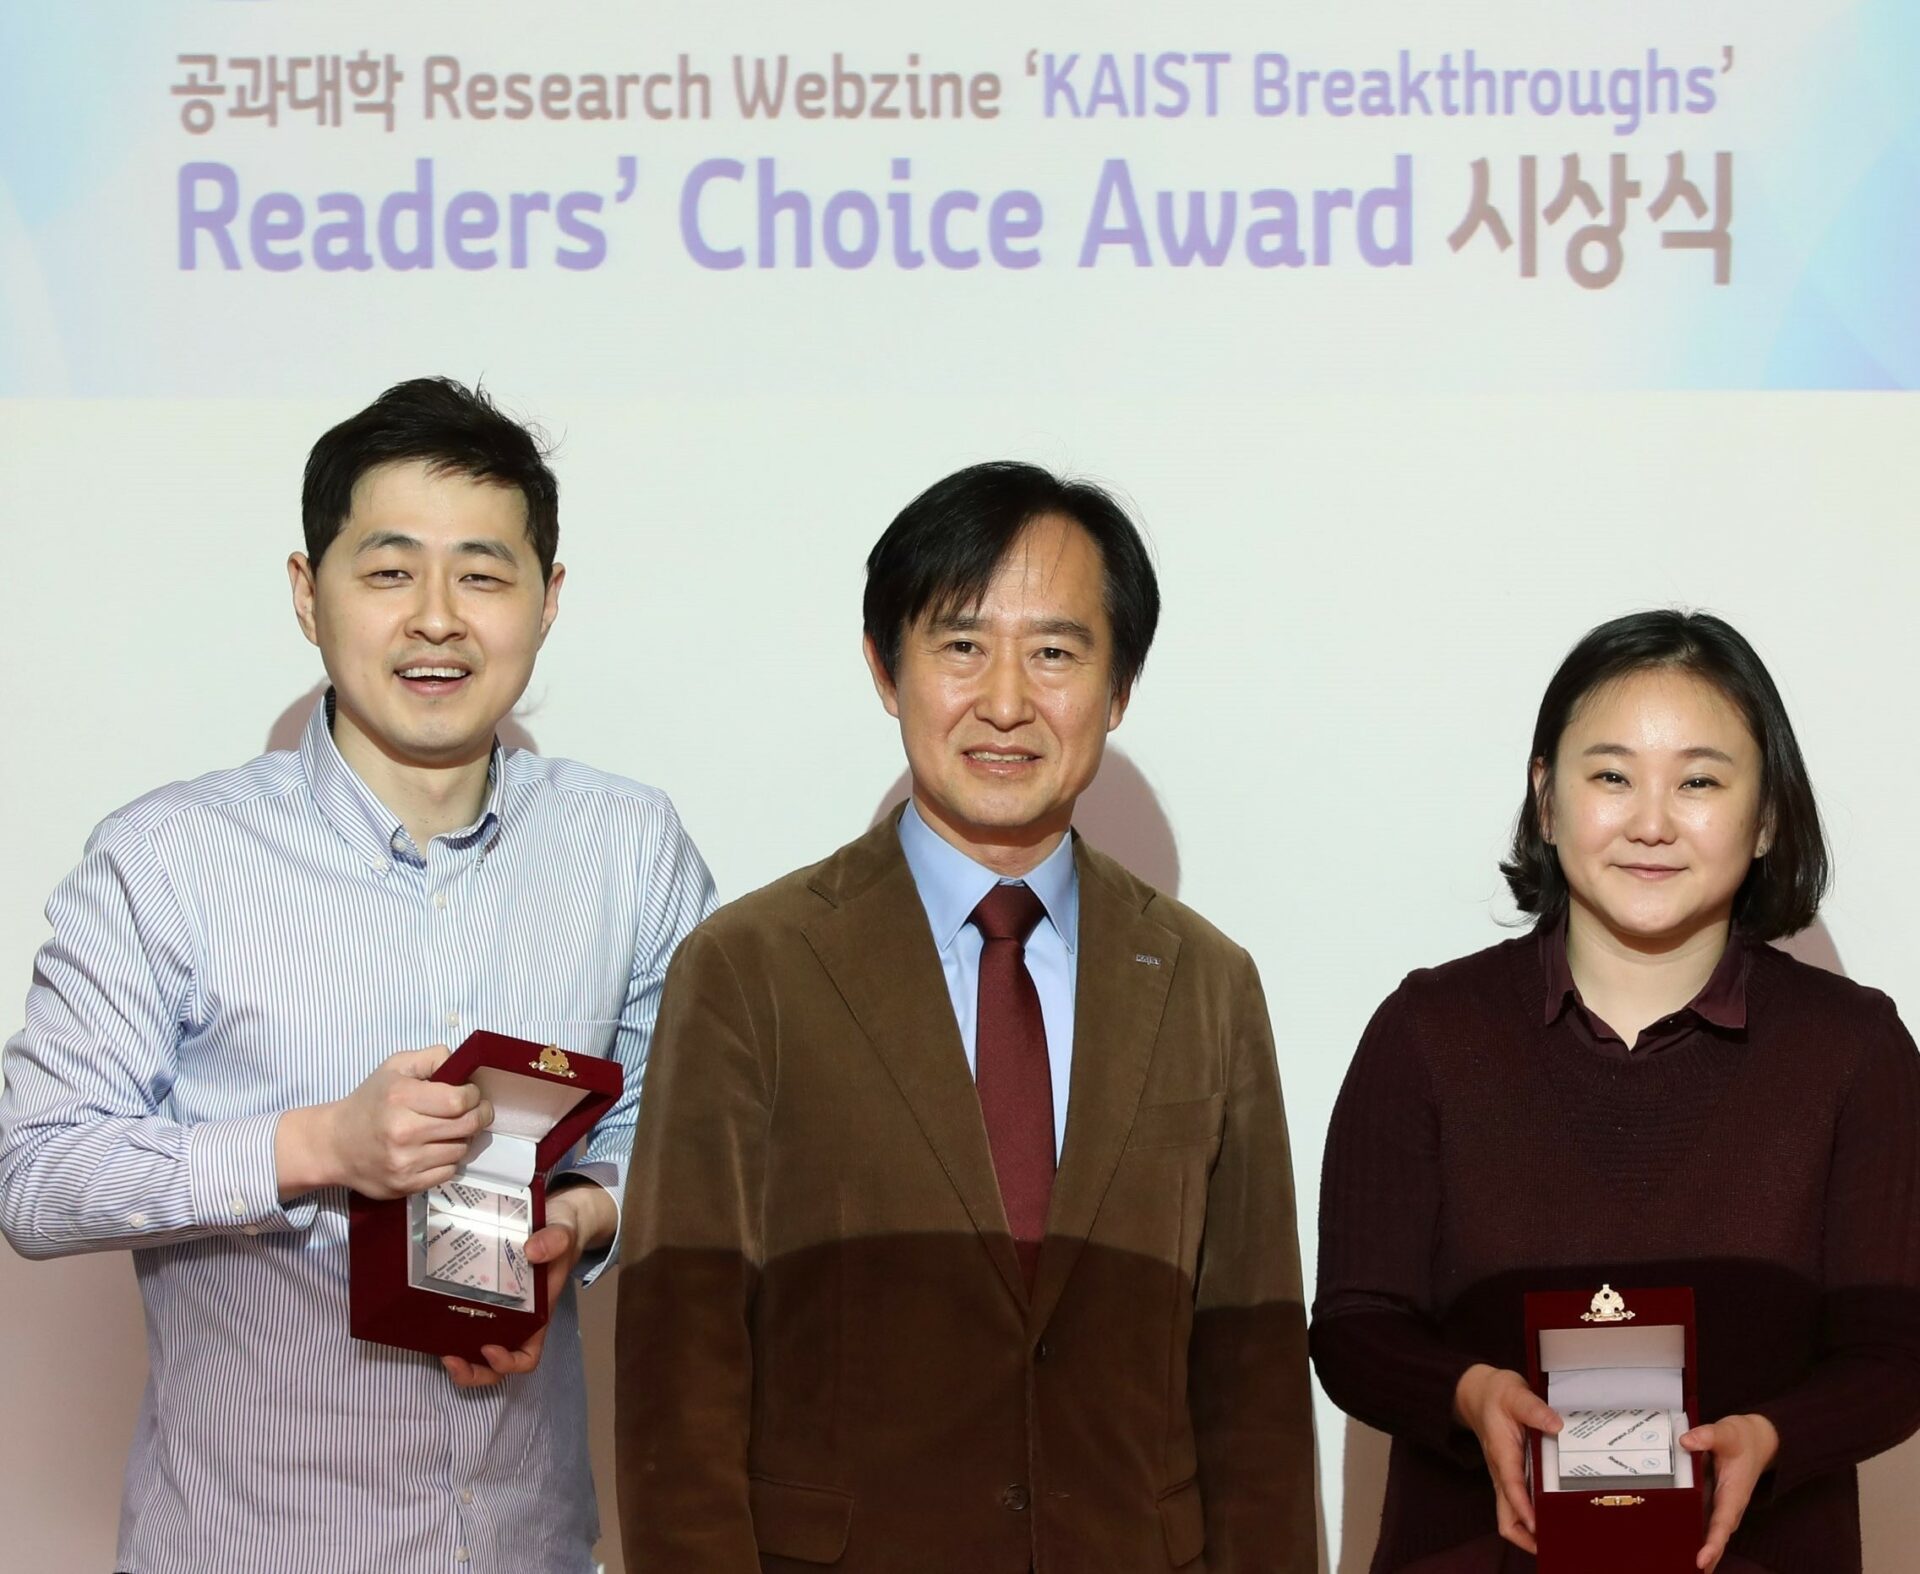 Professor Changho Suh and Prof. Hyunjoo Lee received the 2nd Readers’ Choice Award by the engineering school